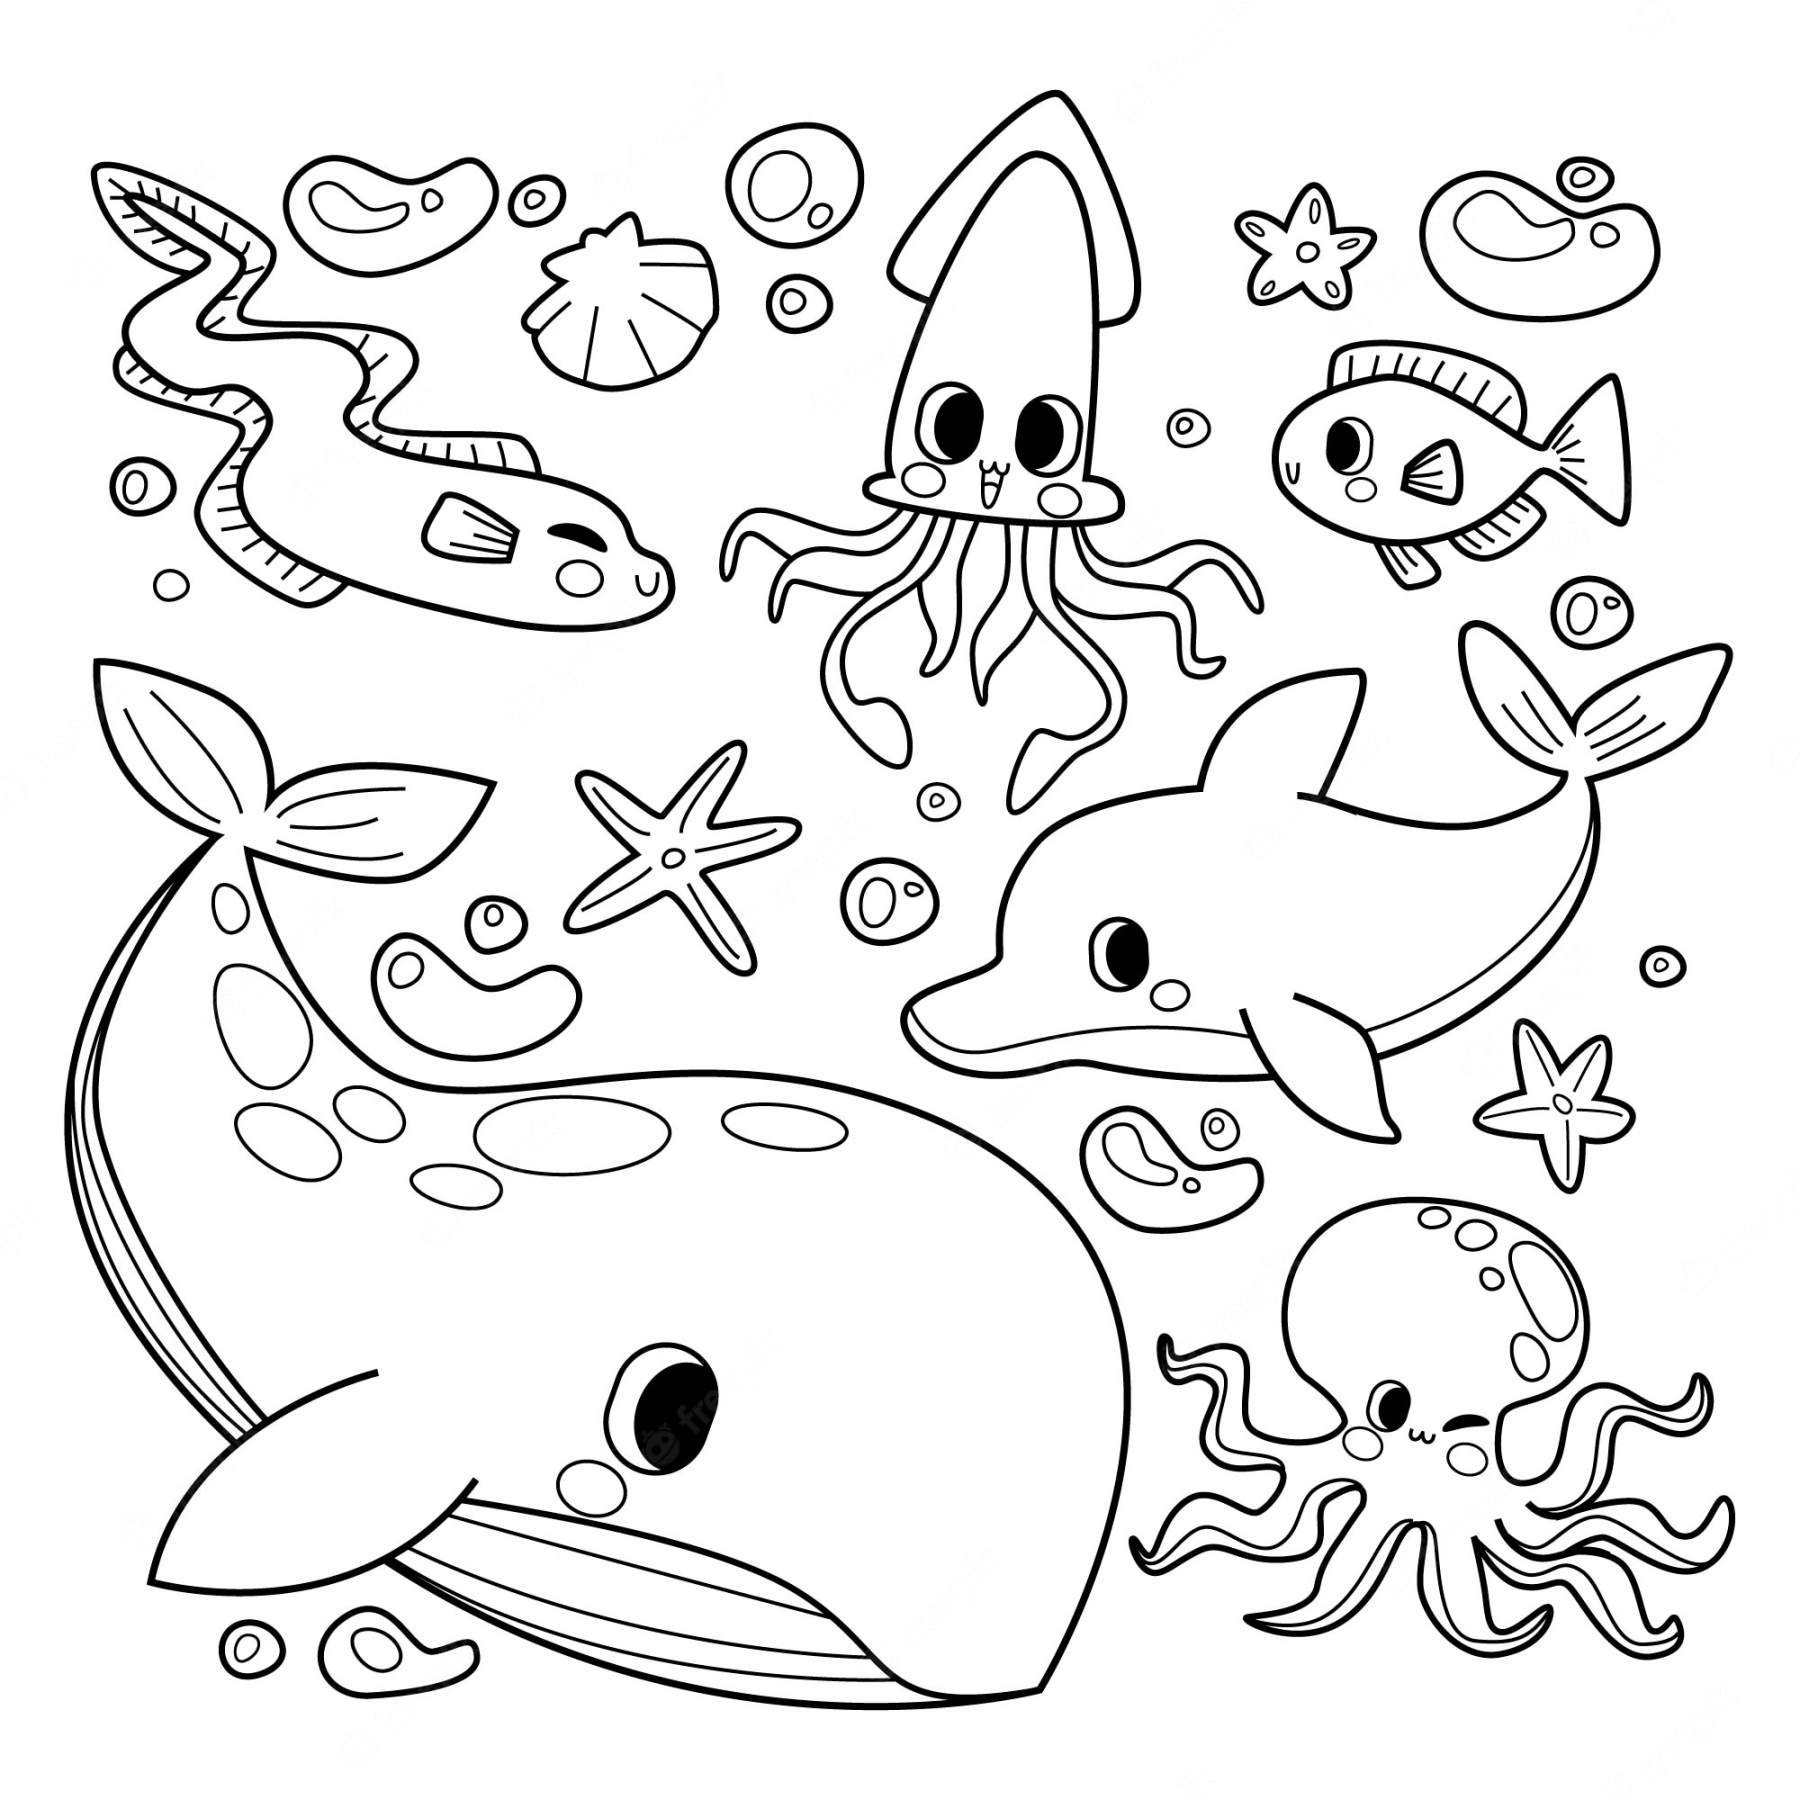 Free Coloring Pages Printable - Printable - Coloring Pages Images - Free Download on Freepik